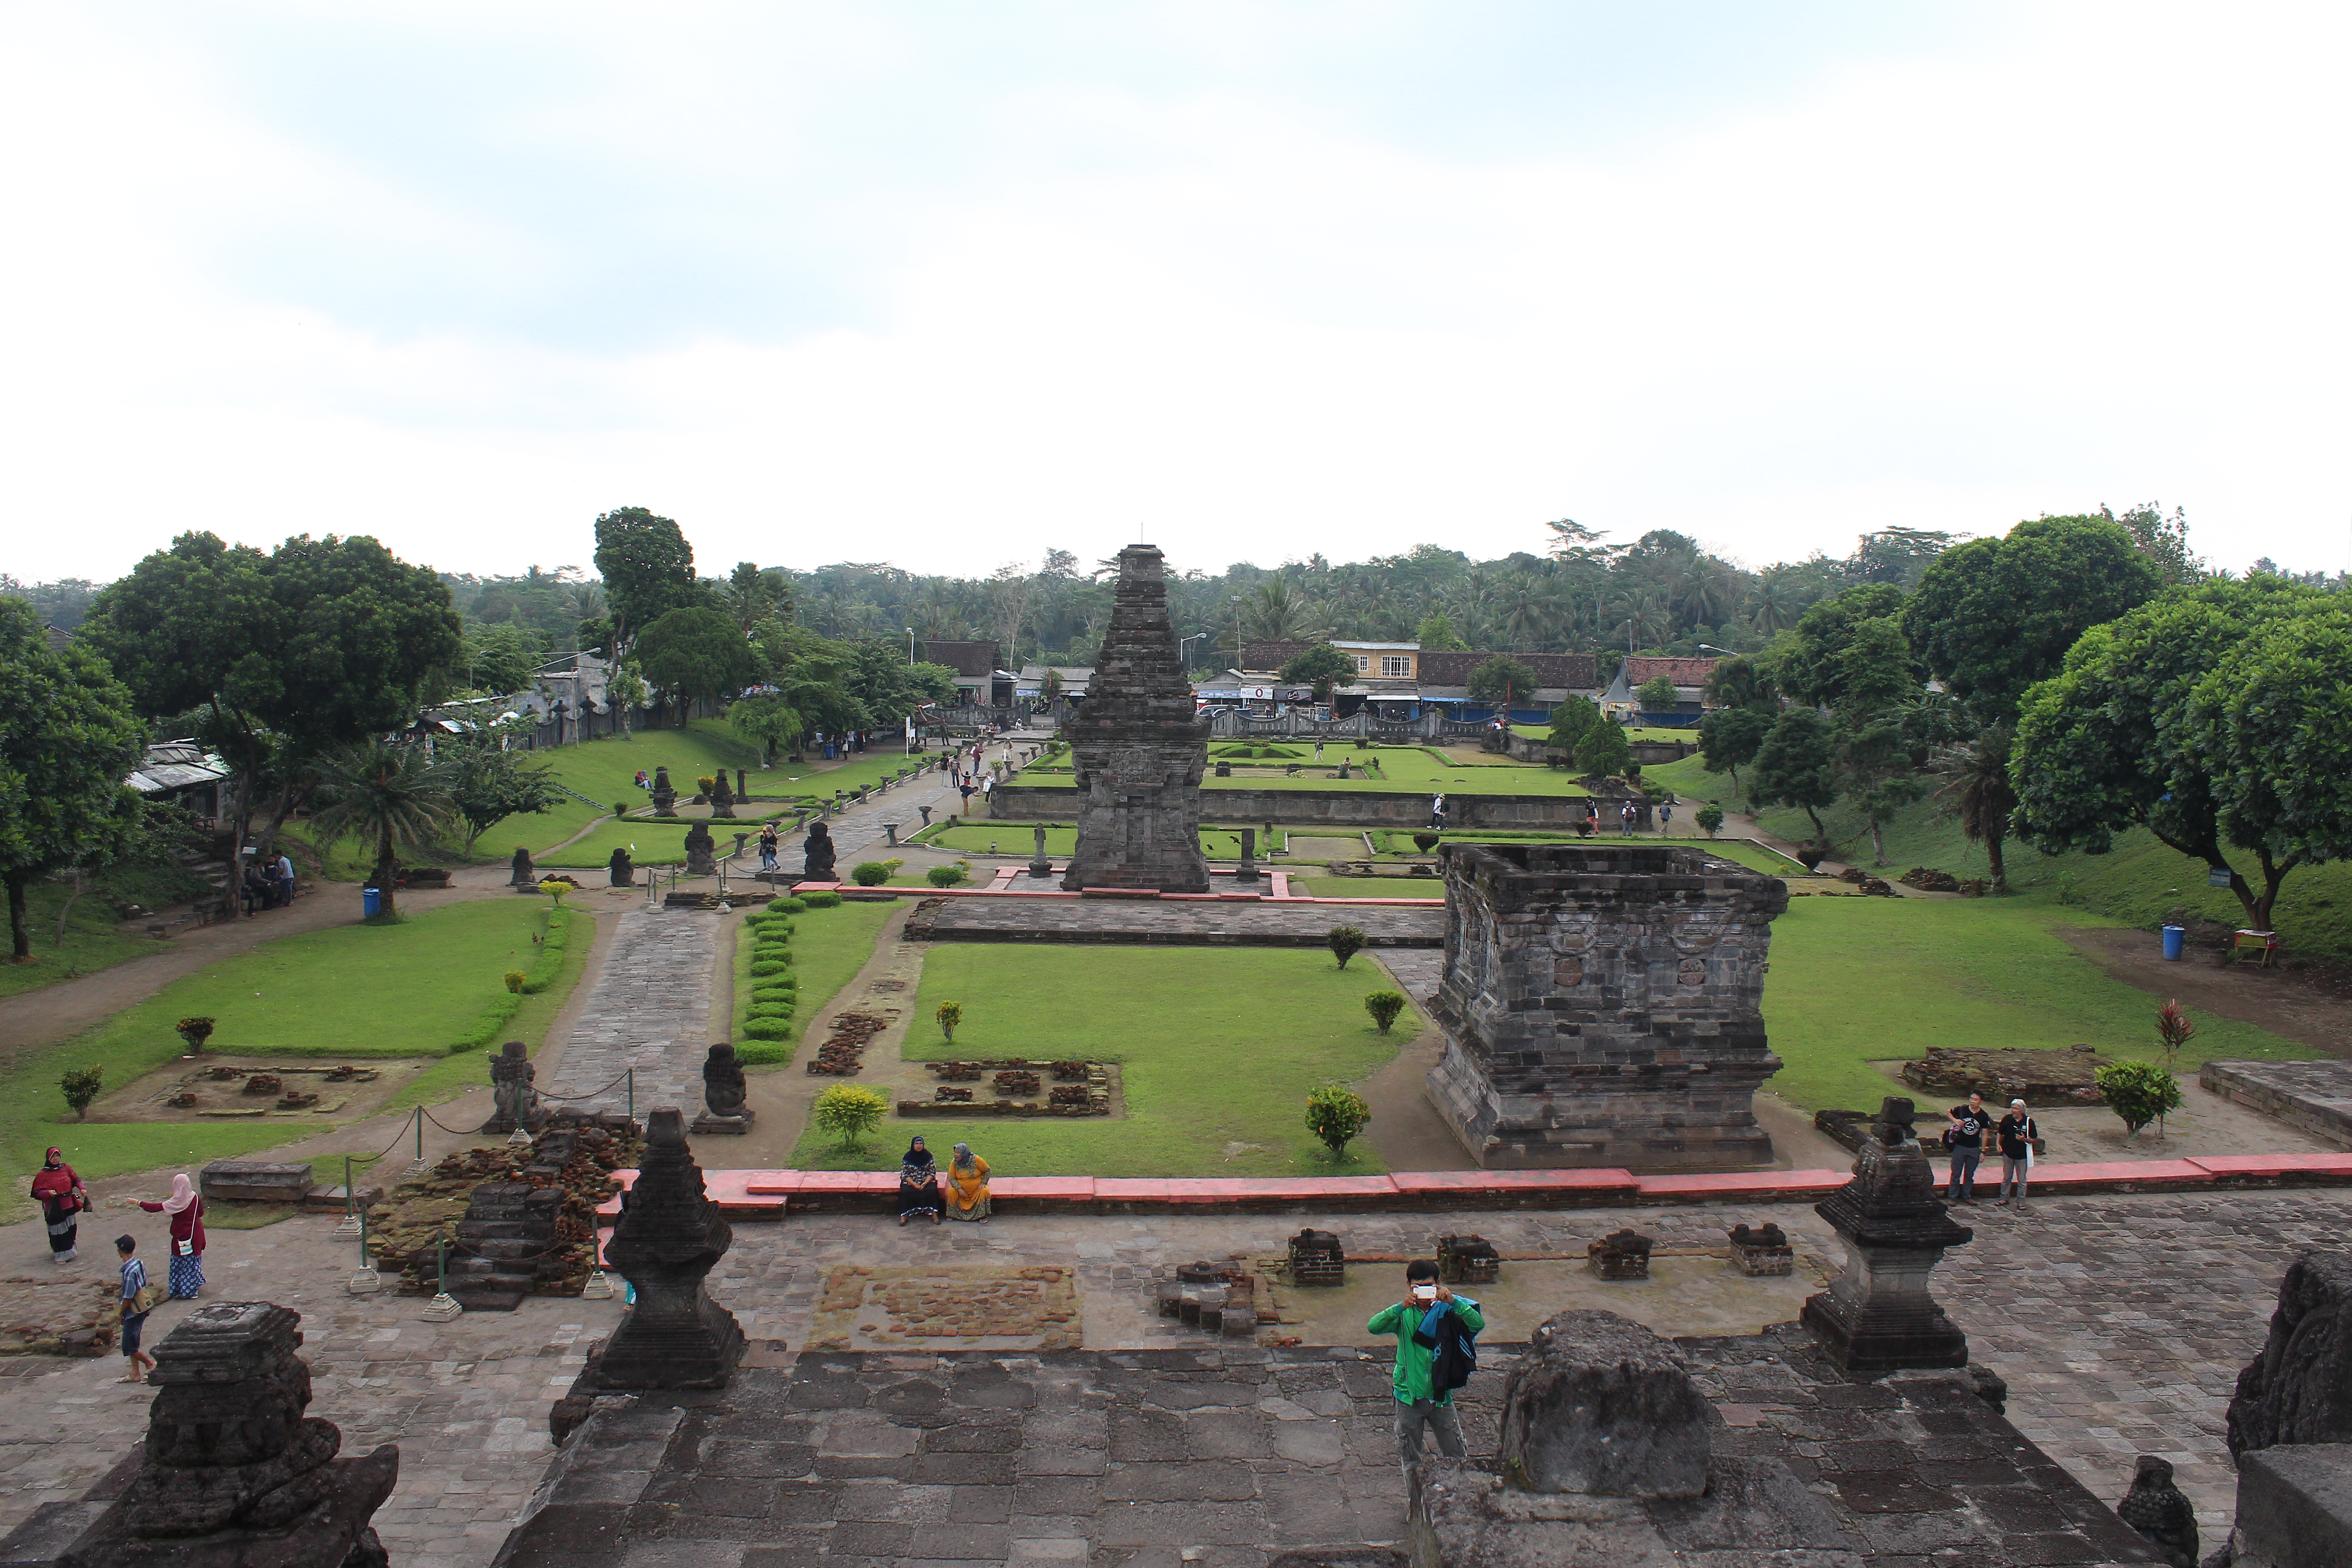 Temple complex with green lawns, seen from above